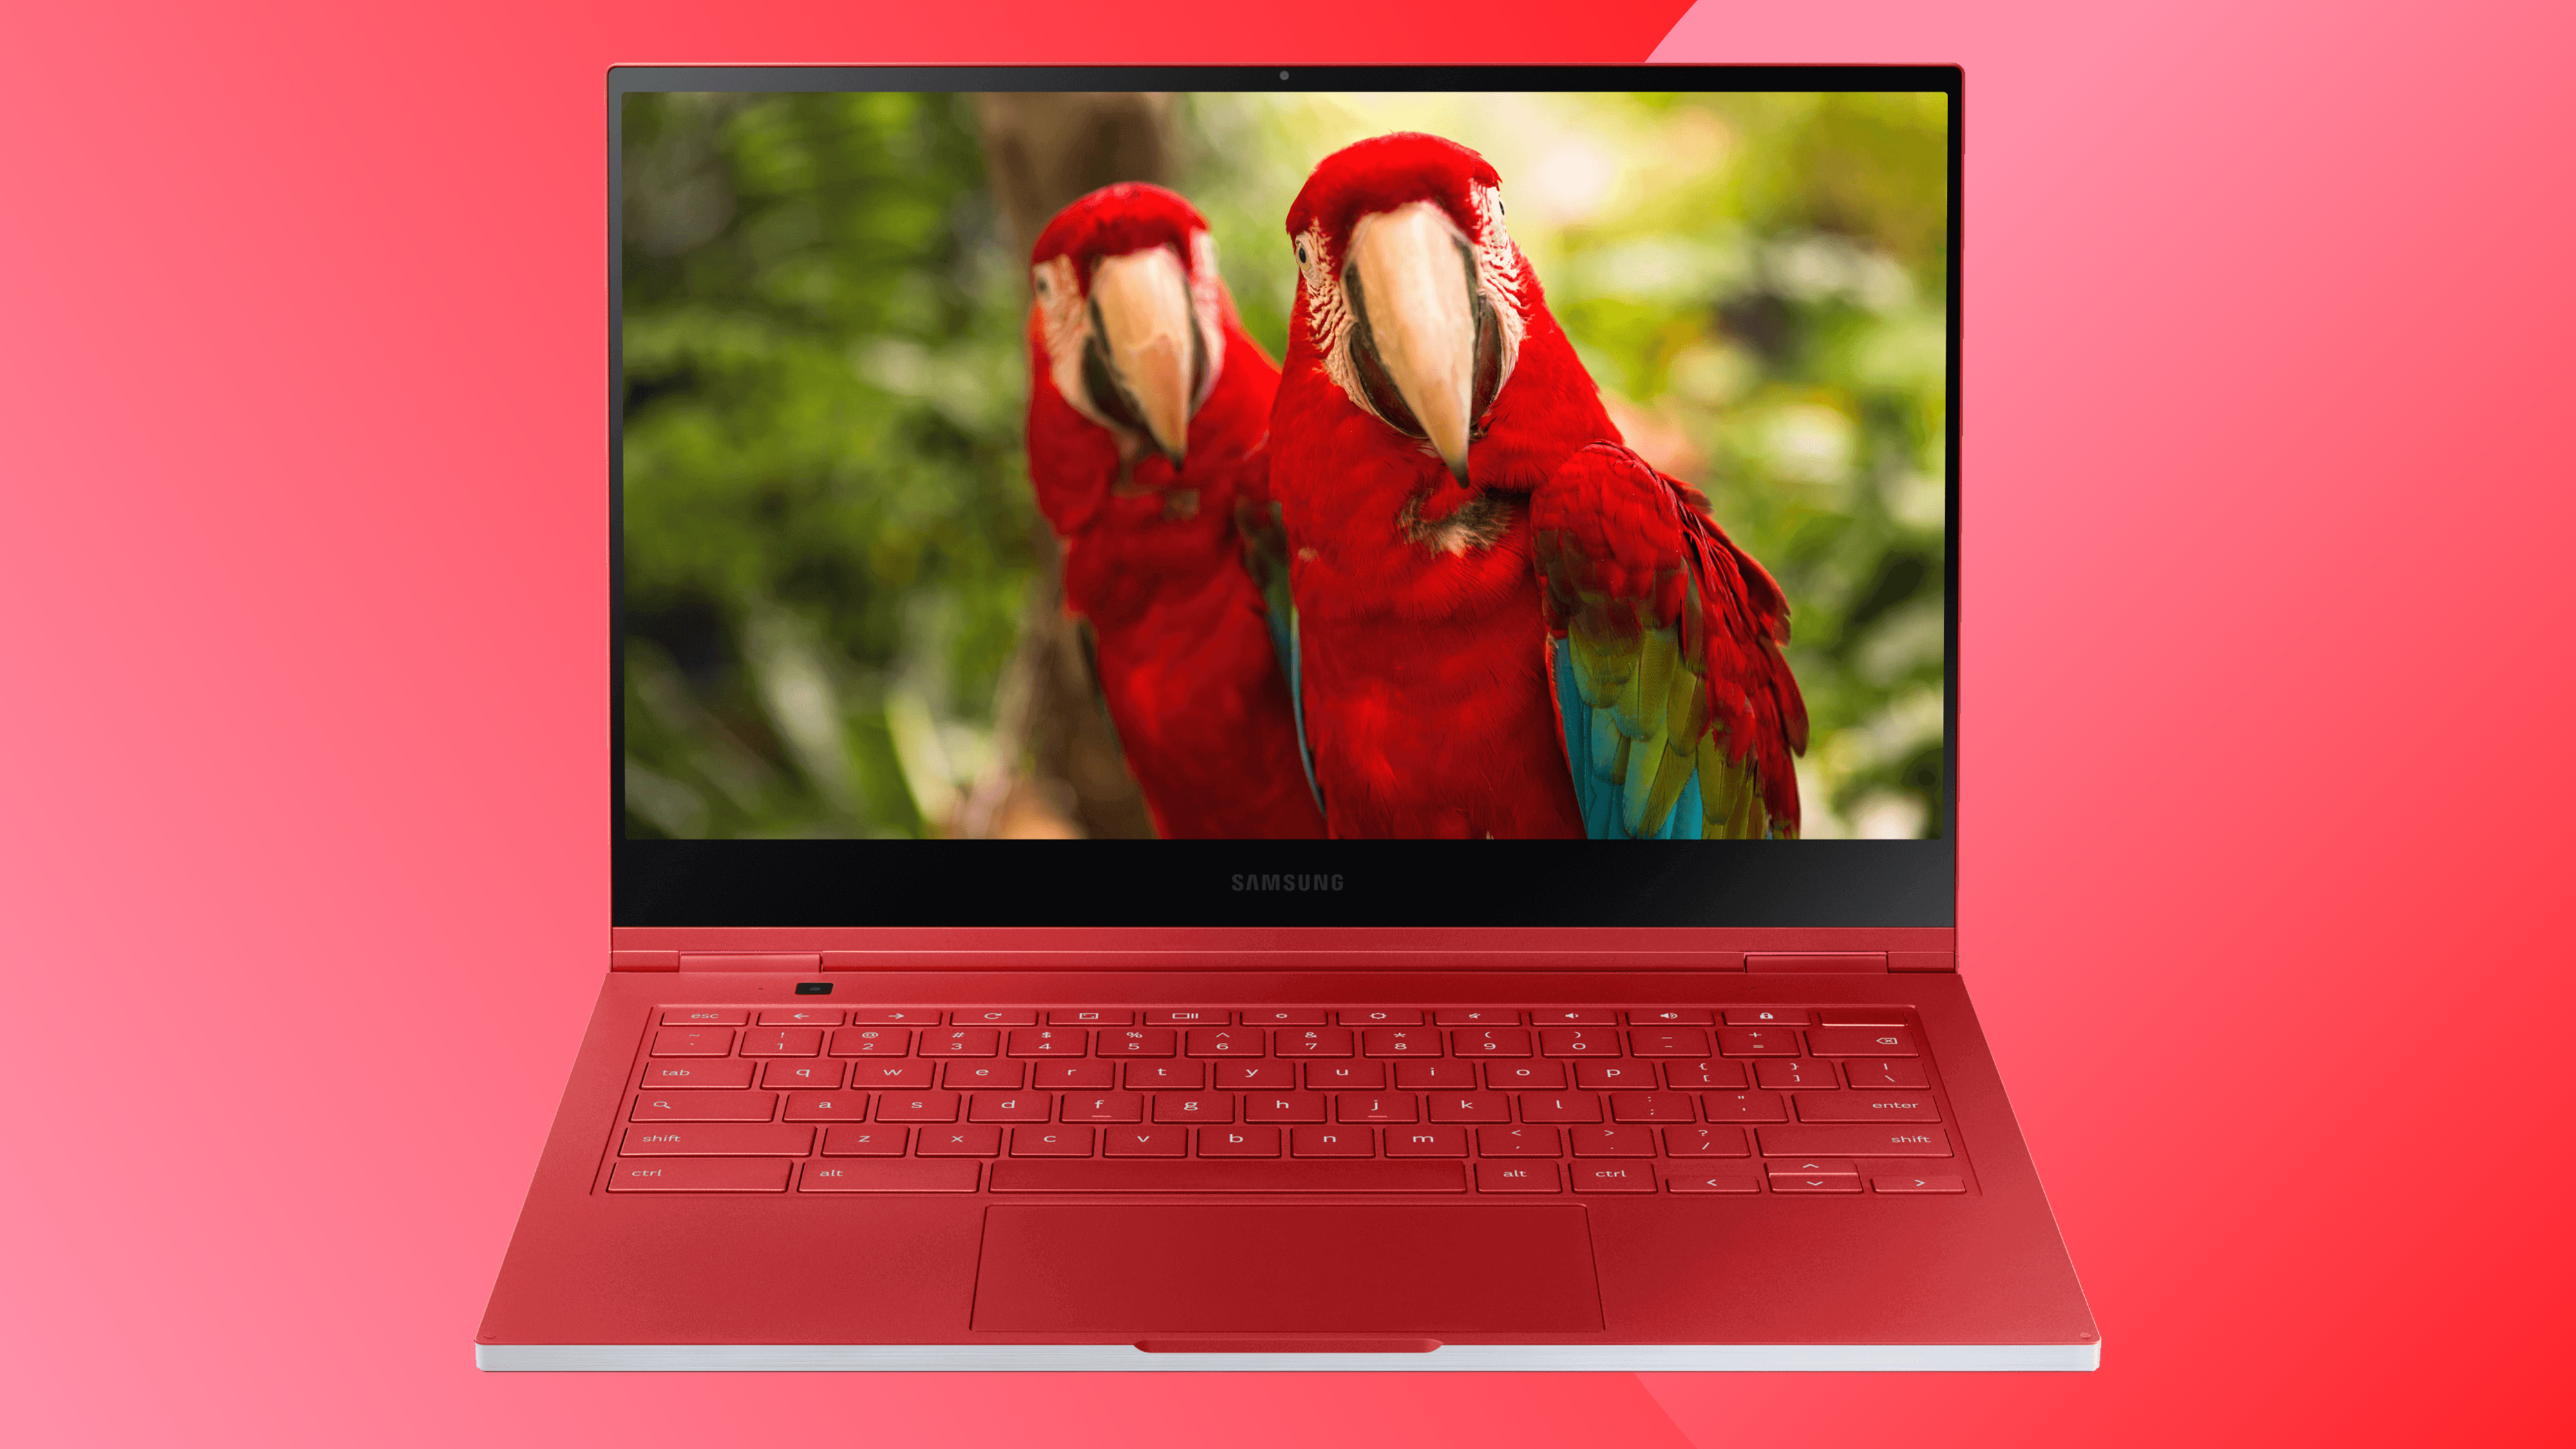 A Samsung laptop Cyber Monday deals image with a Samsung Galaxy Chromebook on a red background